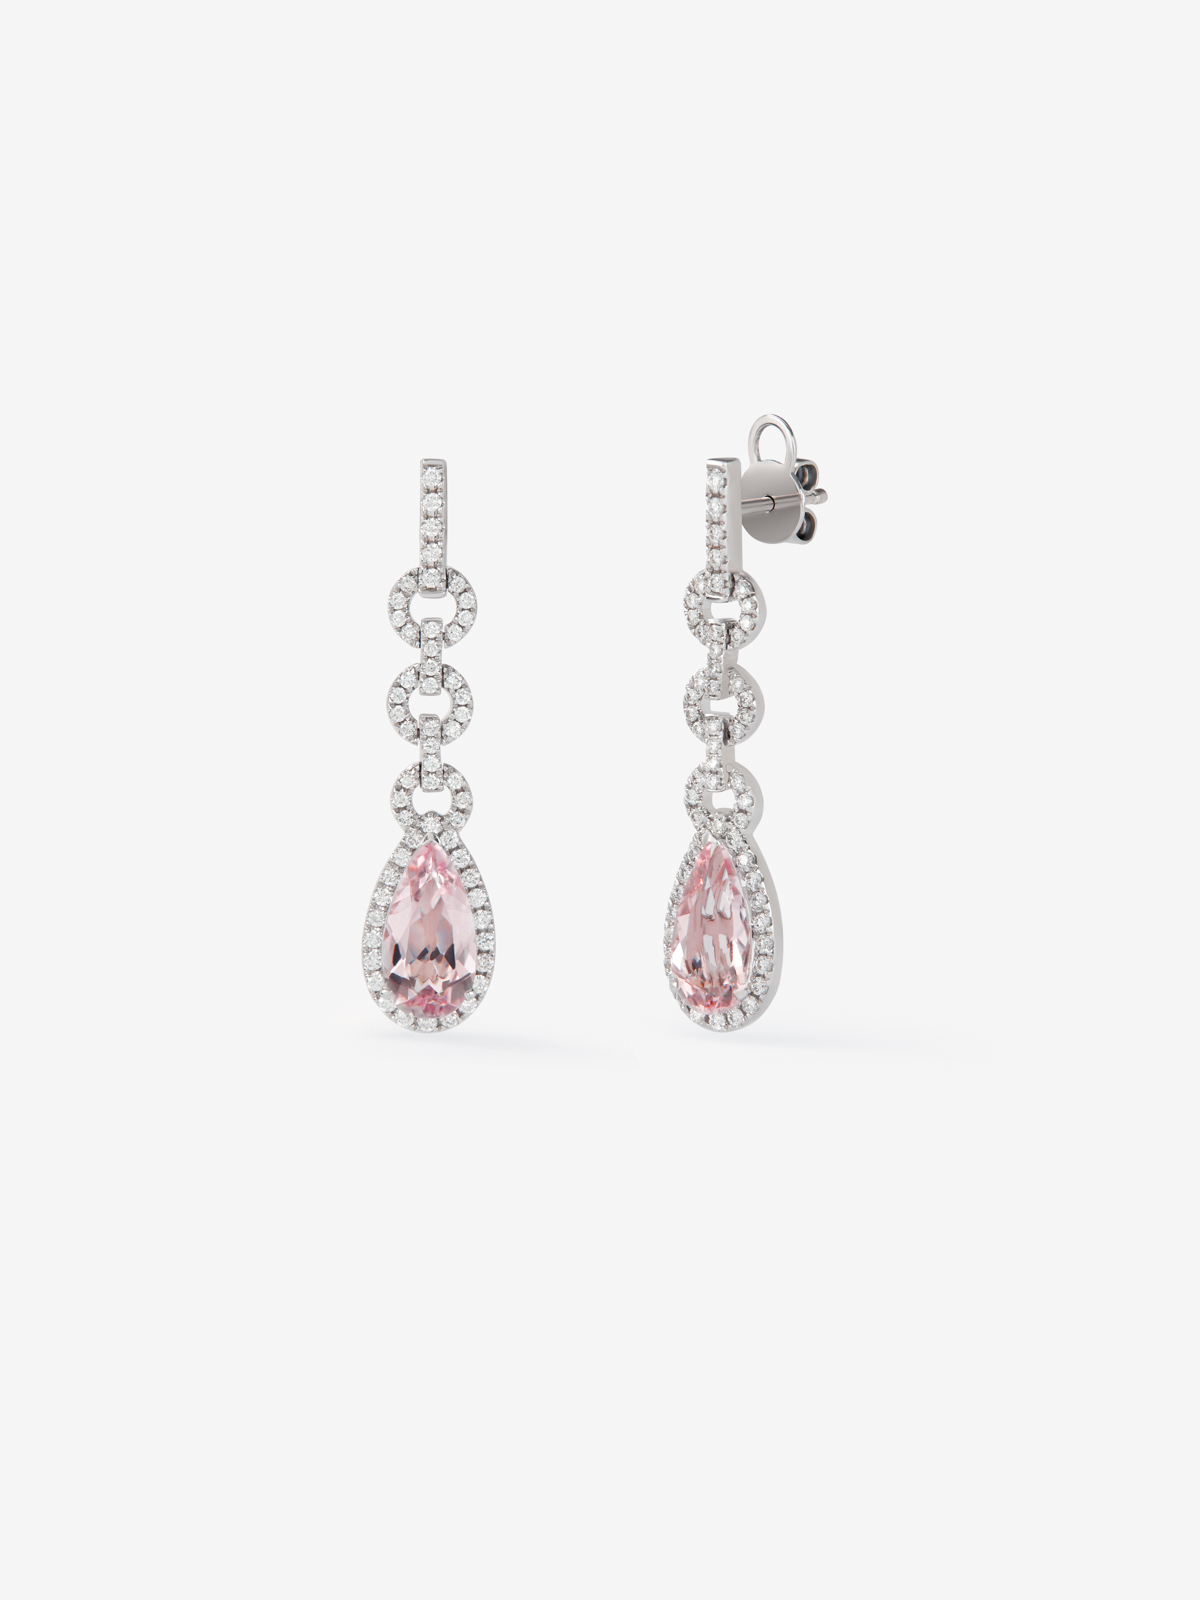 18K white gold earrings with 3 ct pear-cut morganites and 0.69 ct brilliant-cut diamonds